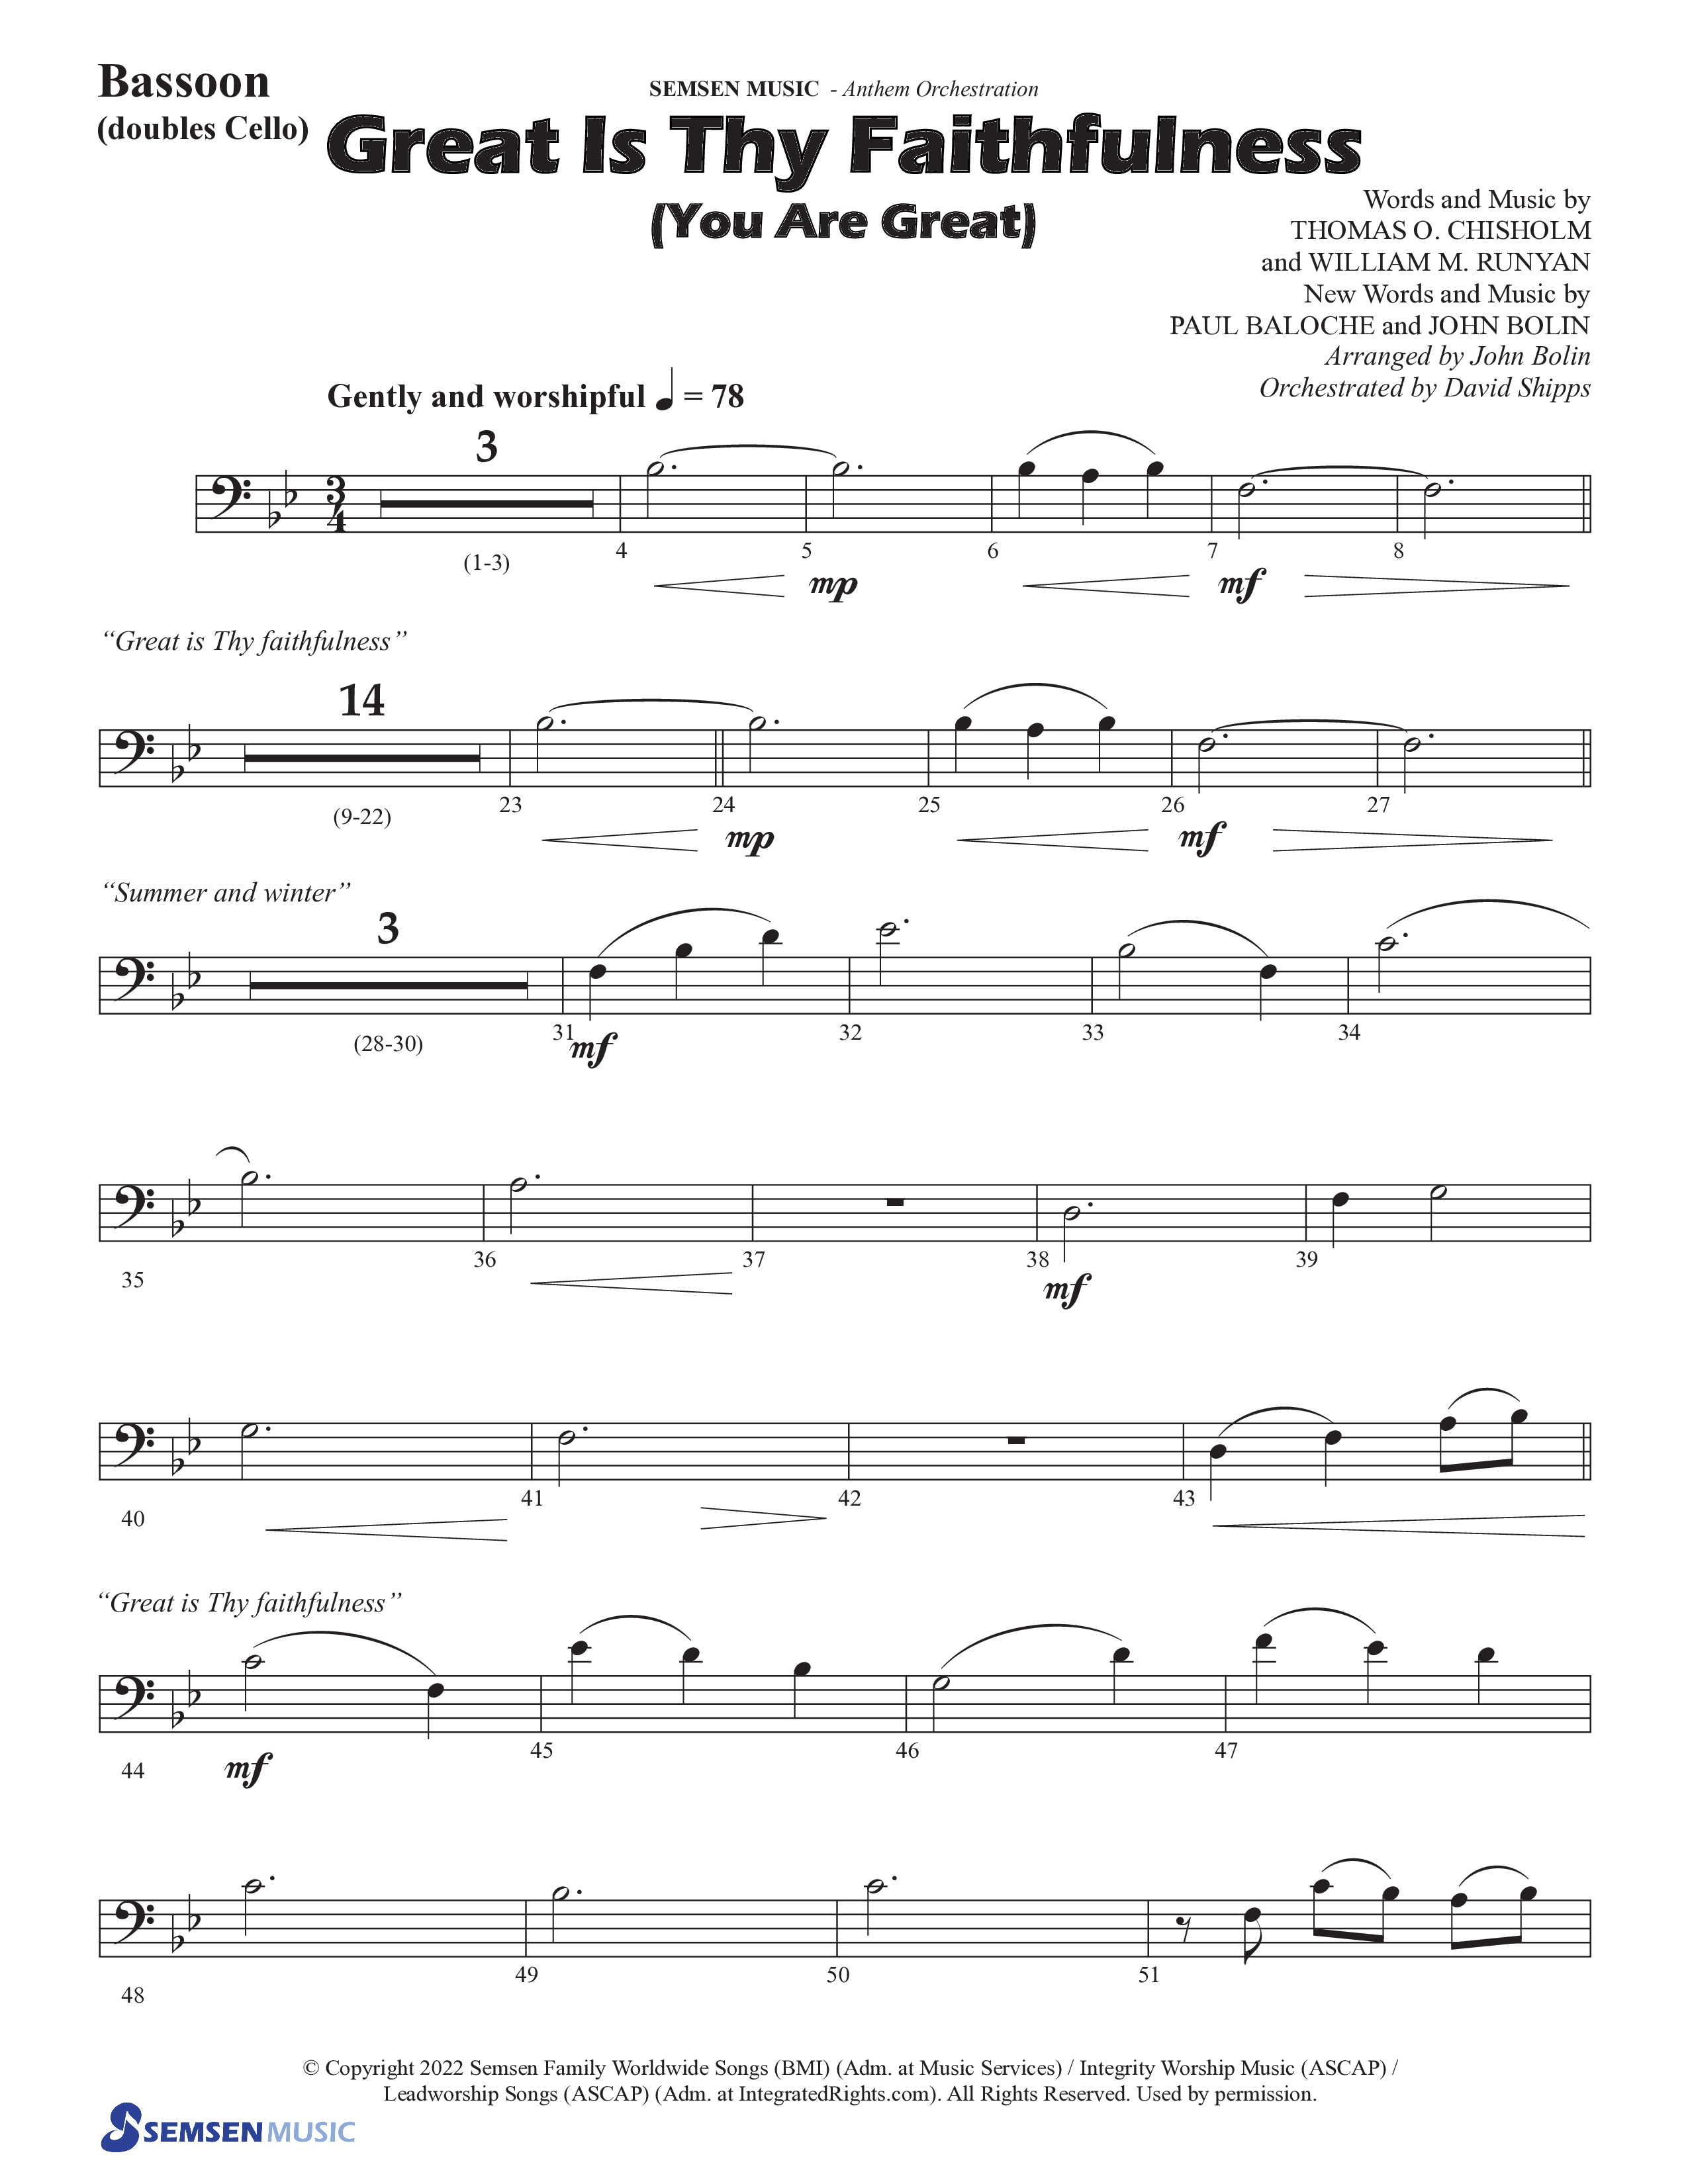 Great Is Thy Faithfulness (You Are Great) (Choral Anthem SATB) Bassoon (Semsen Music / Arr. John Bolin / Orch. David Shipps)